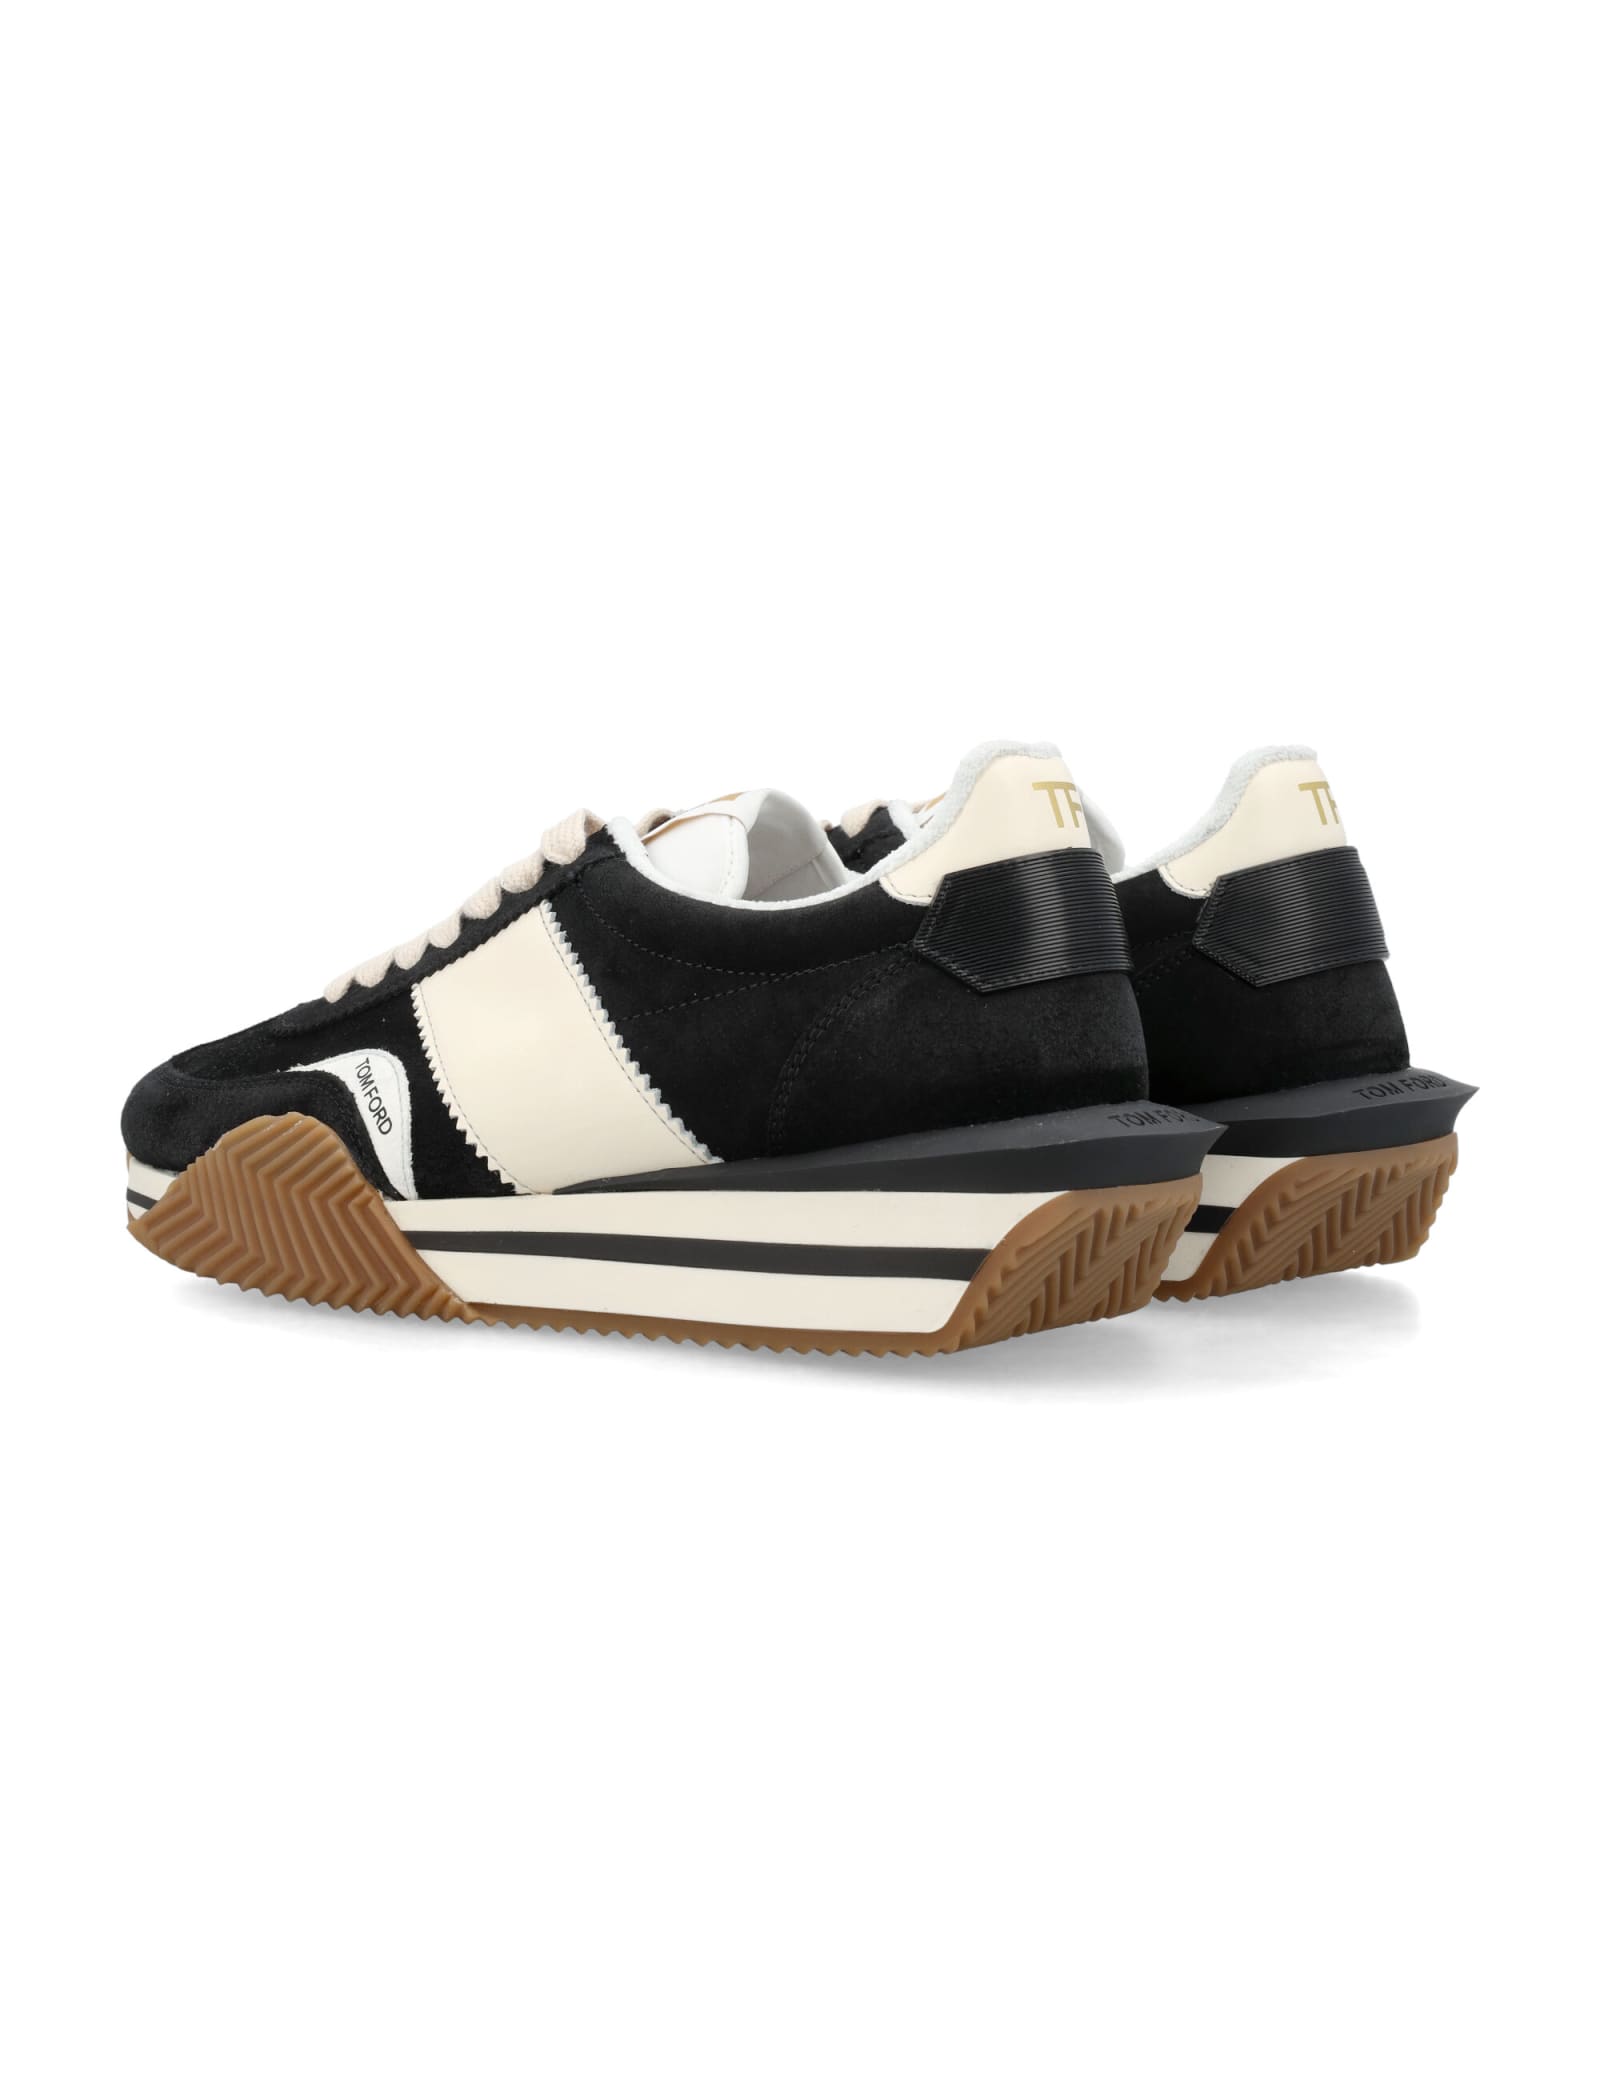 Shop Tom Ford James Sneakers In Black + Cream